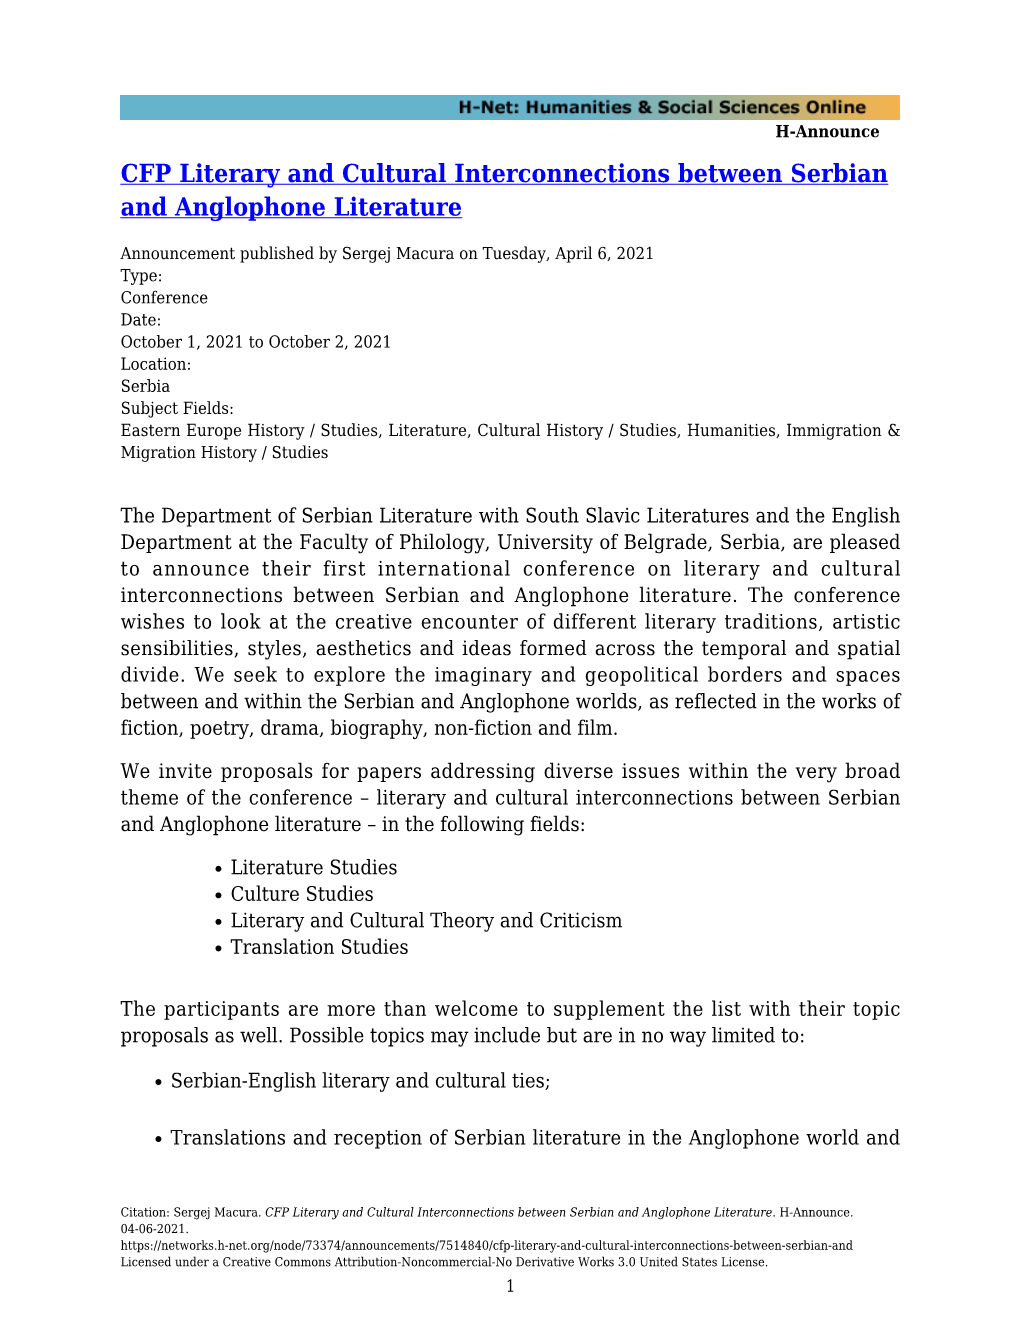 CFP Literary and Cultural Interconnections Between Serbian and Anglophone Literature